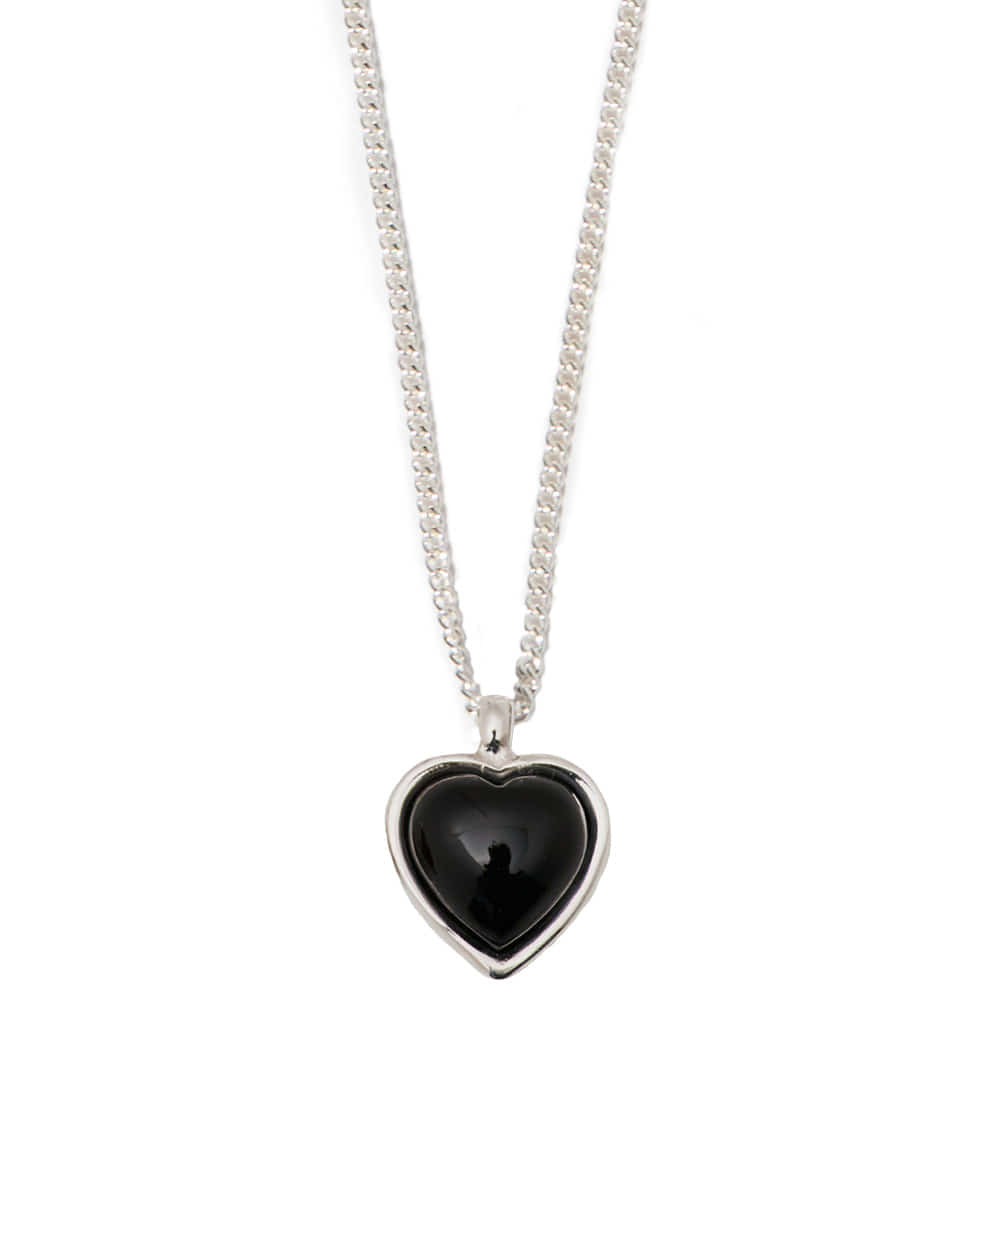 Love charm necklace/ Silver